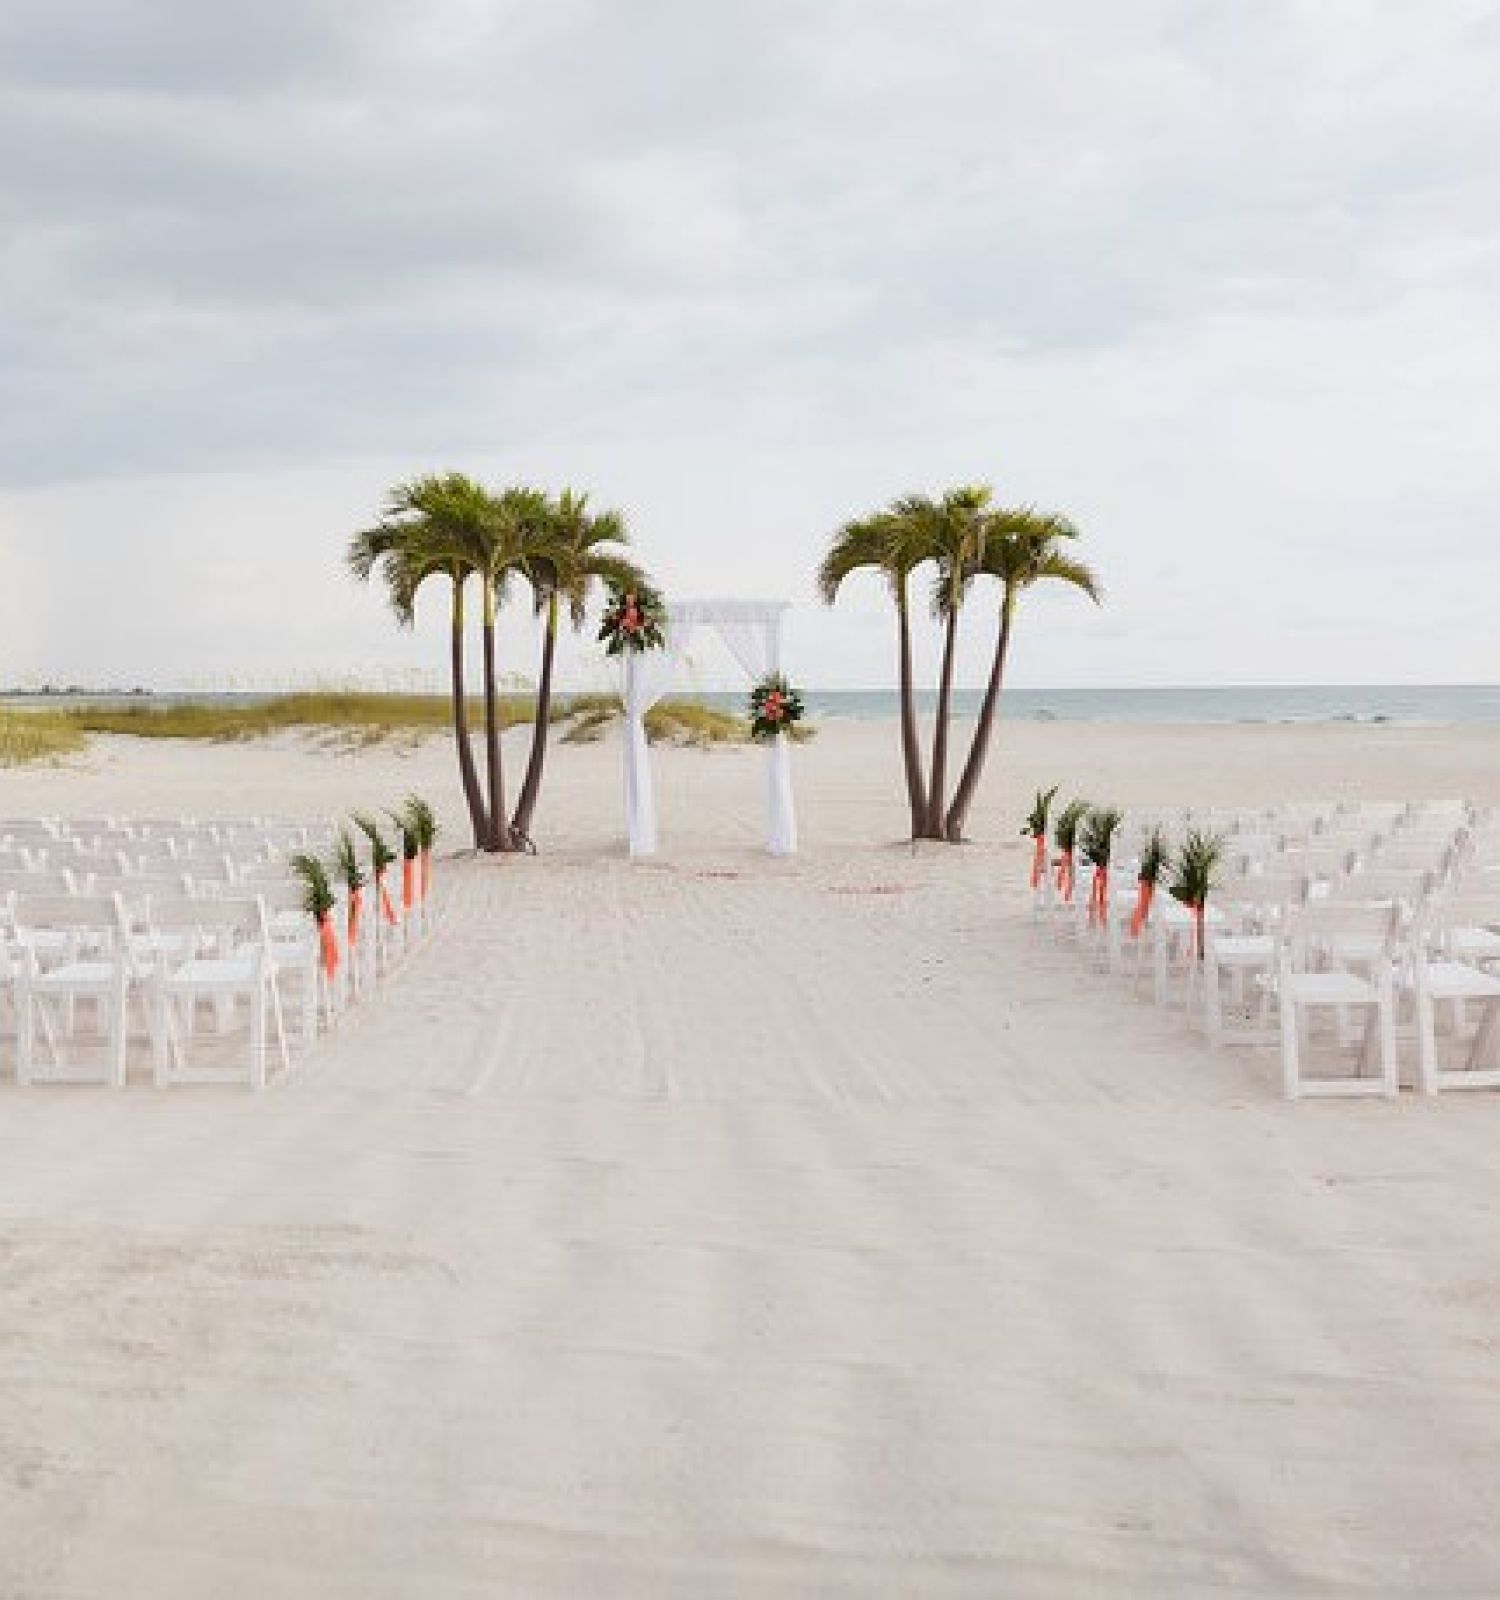 An outdoor wedding setup on a beach with white chairs arranged in rows, facing an arch decorated with flowers and flanked by palm trees, ending the sentence.